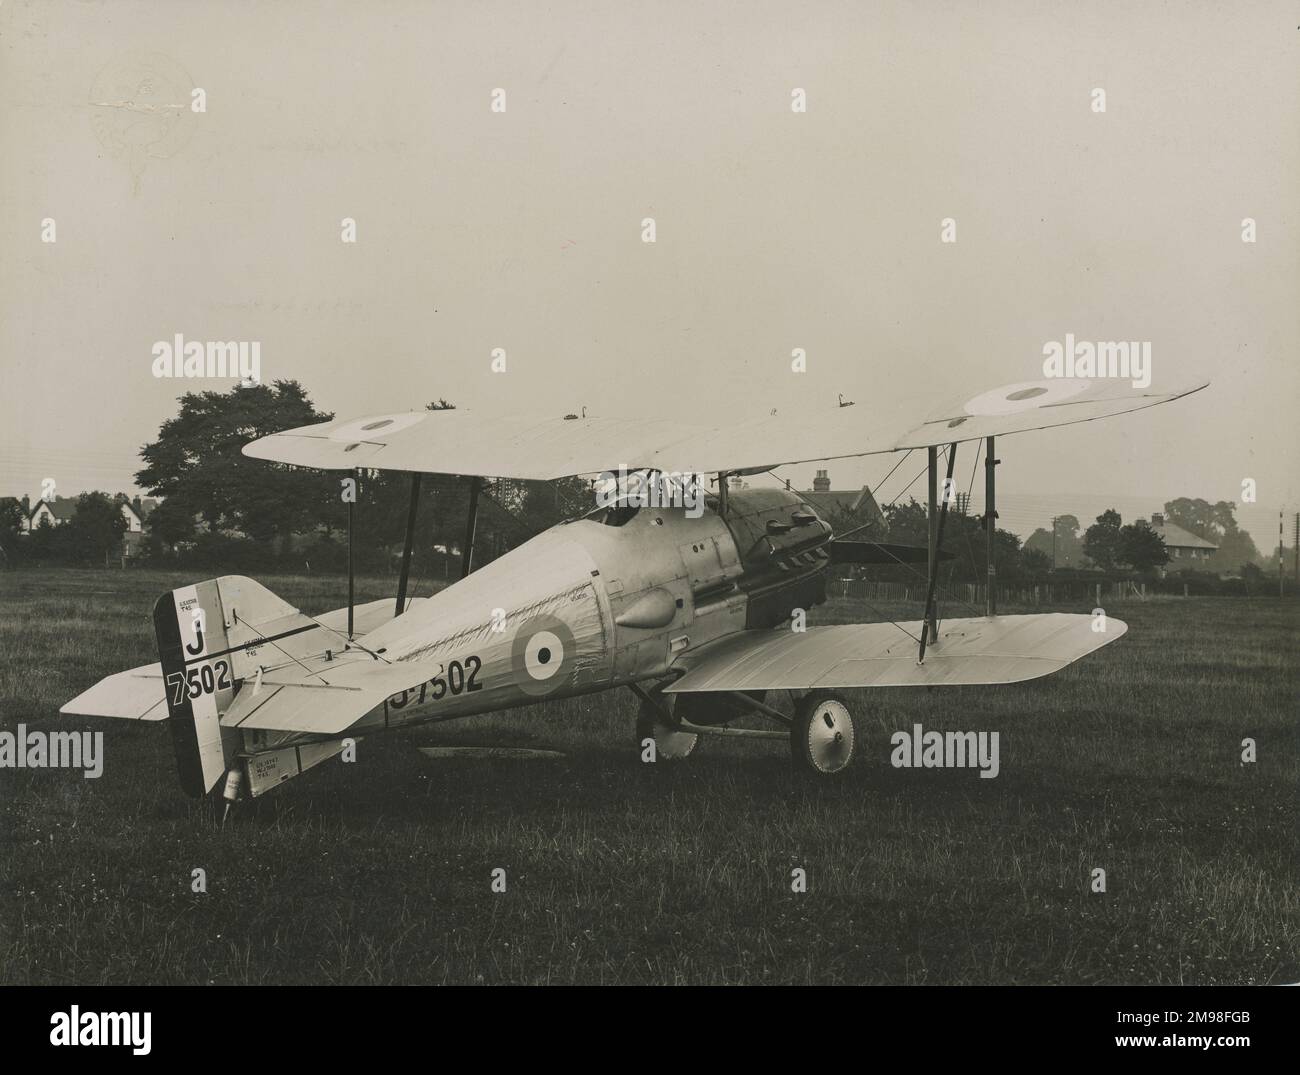 The second Gloster Gorcock, J7502, with a Grebe-type tale unit. Stock Photo